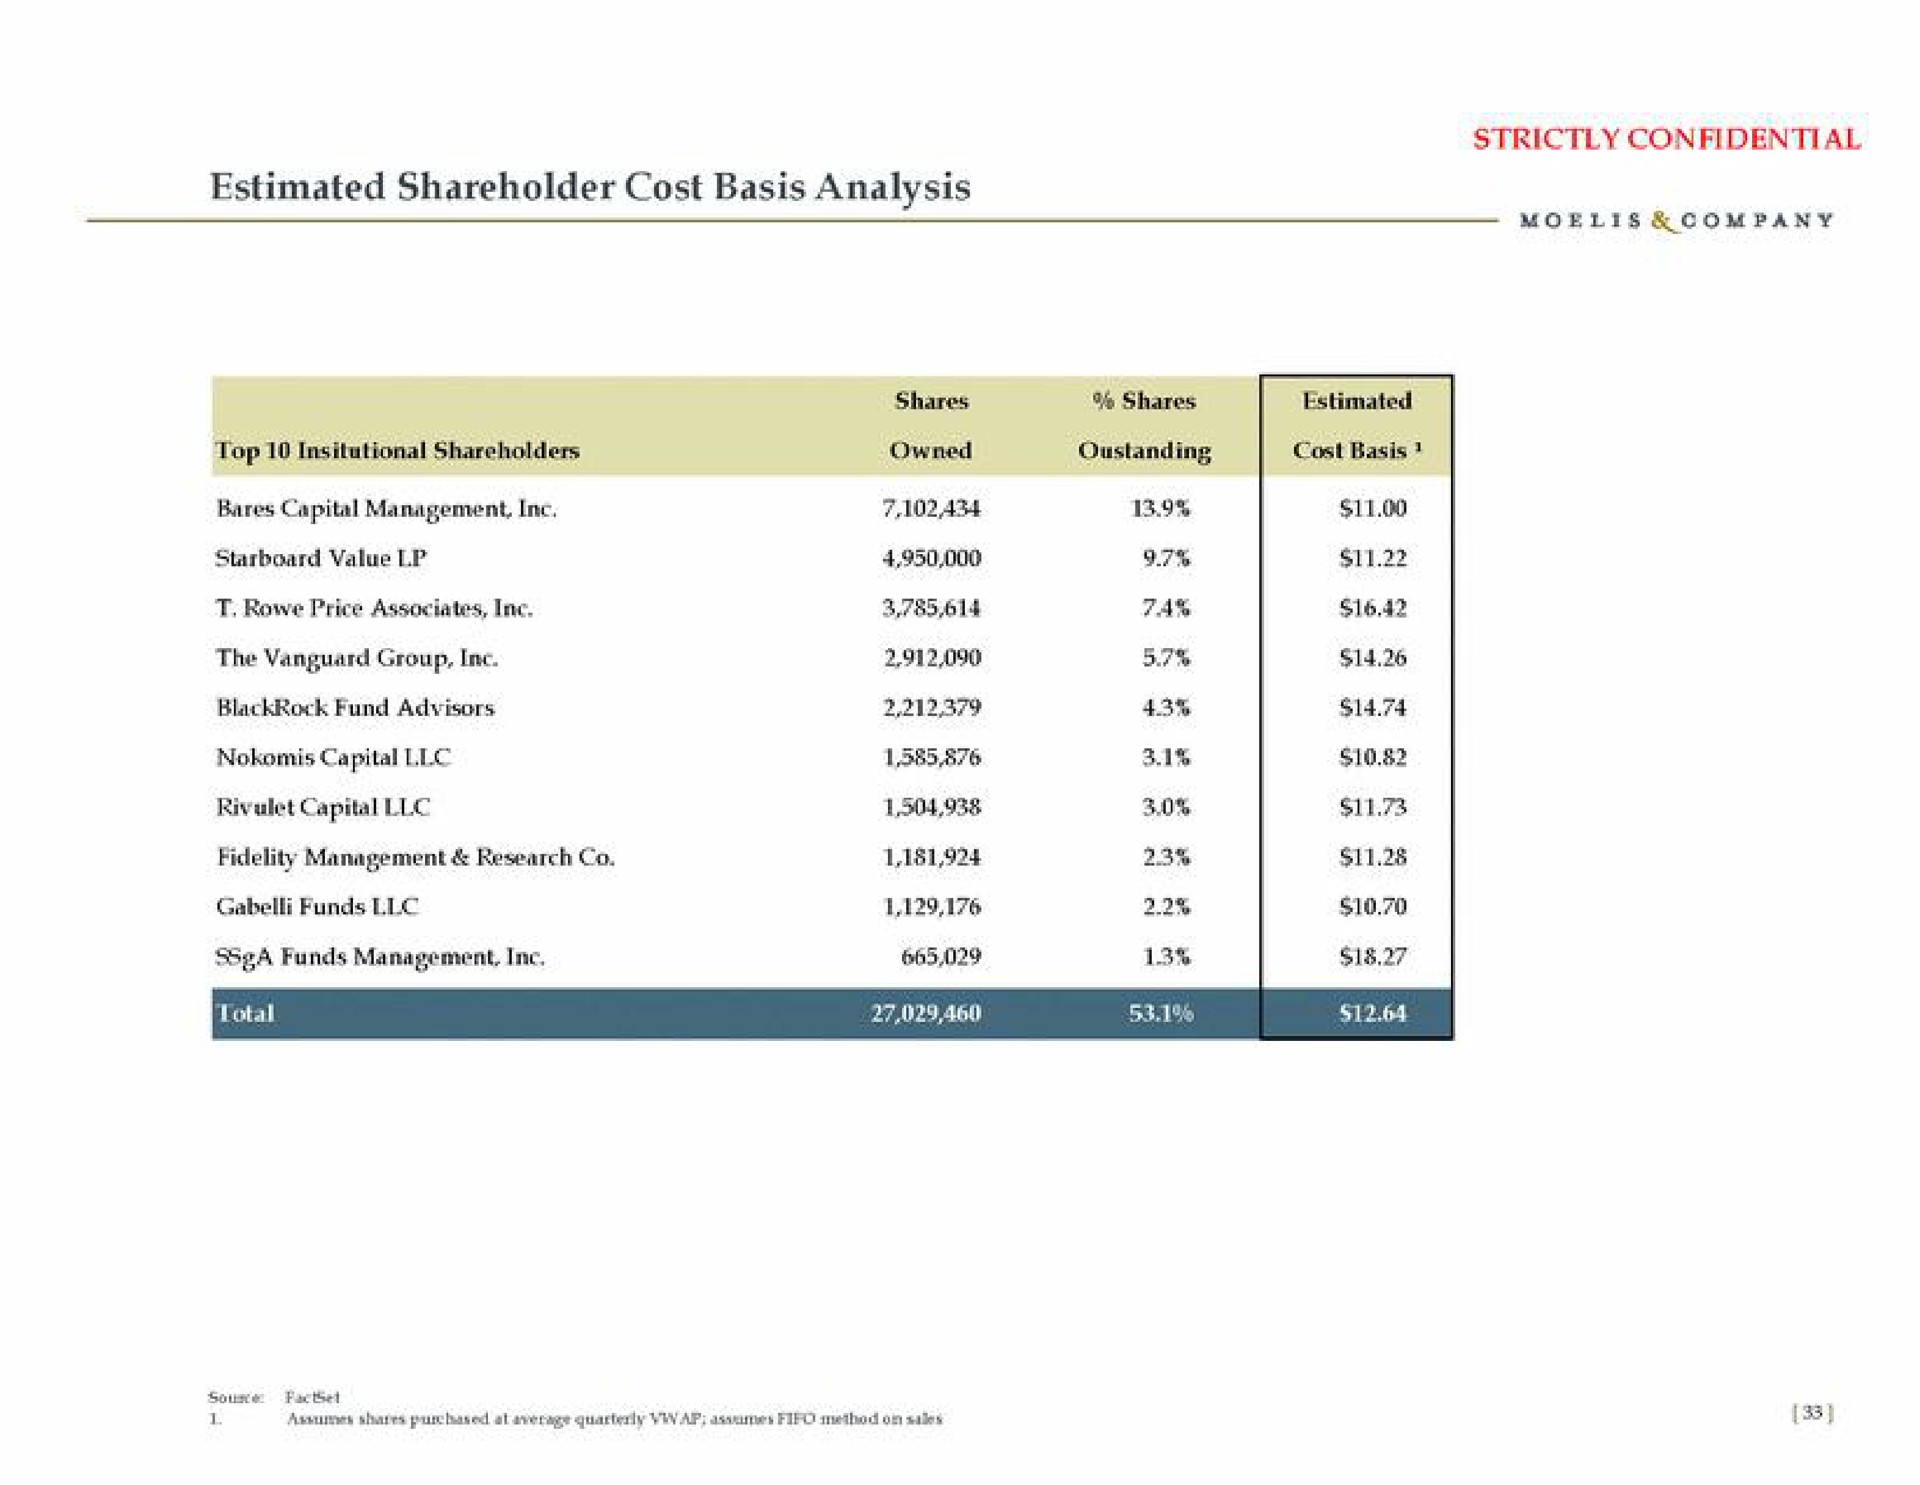 estimated shareholder cost basis analysis strictly confidential | Moelis & Company